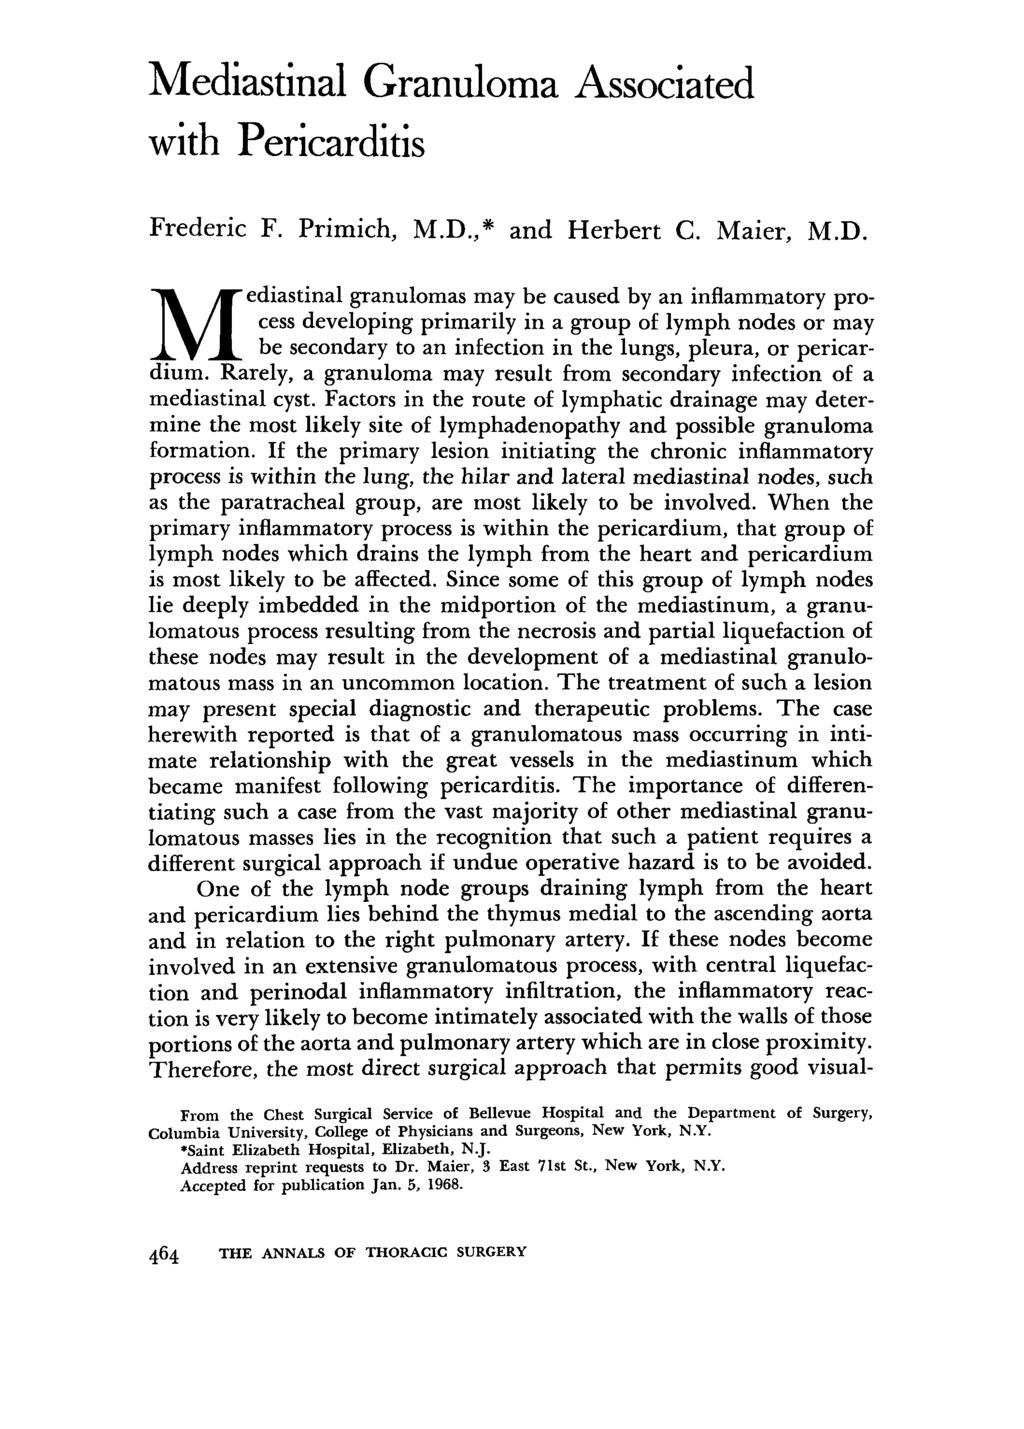 Mediastinal Granuloma Associated with Pericardi t is Frederic F. Primich, M.D.